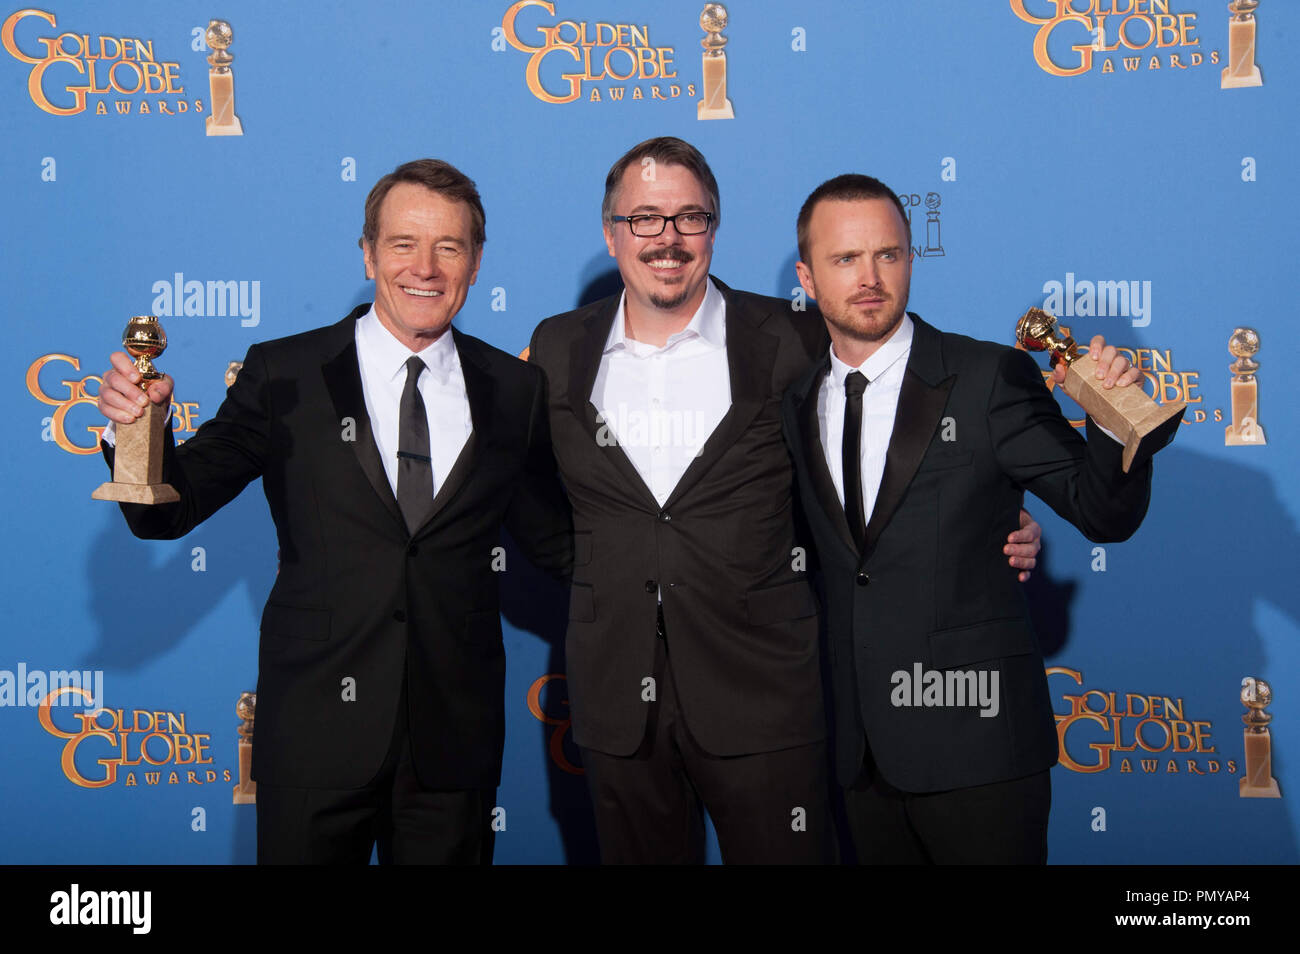 For BEST TELEVISION SERIES – DRAMA, the Golden Globe is awarded to “BREAKING BAD” (AMC), produced by Sony Pictures Television. Bryan Cranston, Vince Gilligan and Aaron Paul pose with the award backstage in the press room at the 71st Annual Golden Globe Awards at the Beverly Hilton in Beverly Hills, CA on Sunday, January 12, 2014.  File Reference # 32222 376JRC  For Editorial Use Only -  All Rights Reserved Stock Photo